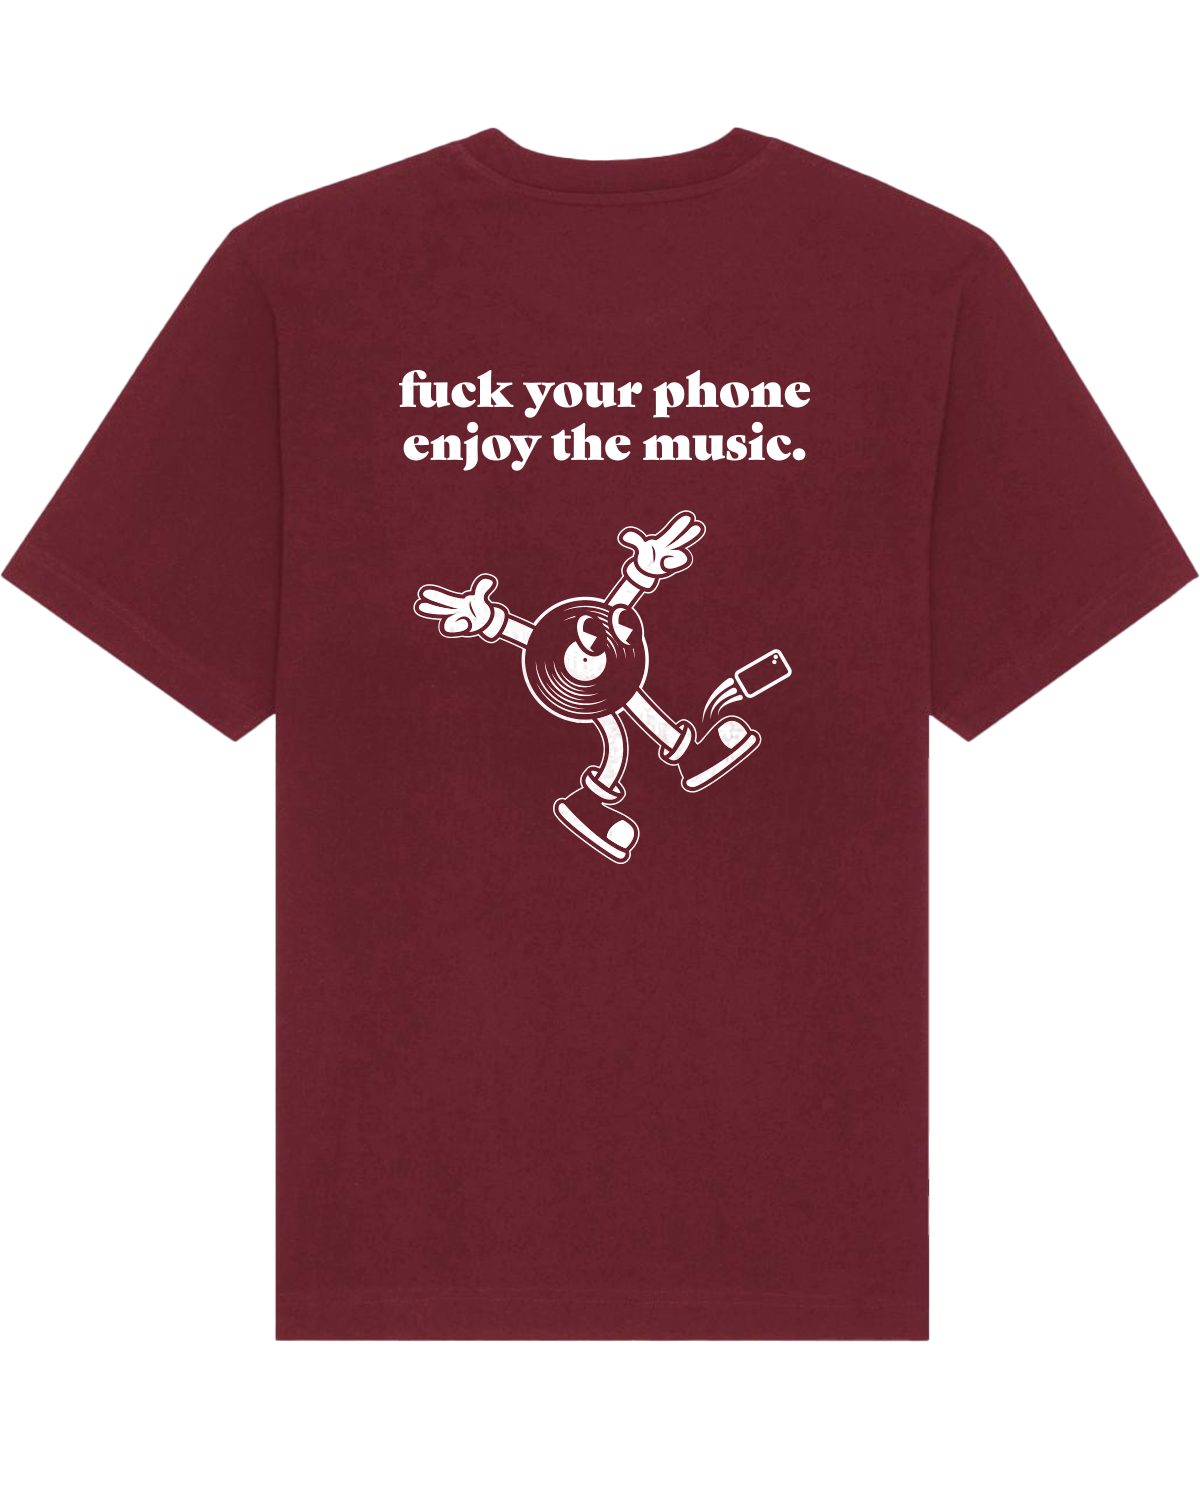 "Fuck Your Phone" Red Tee